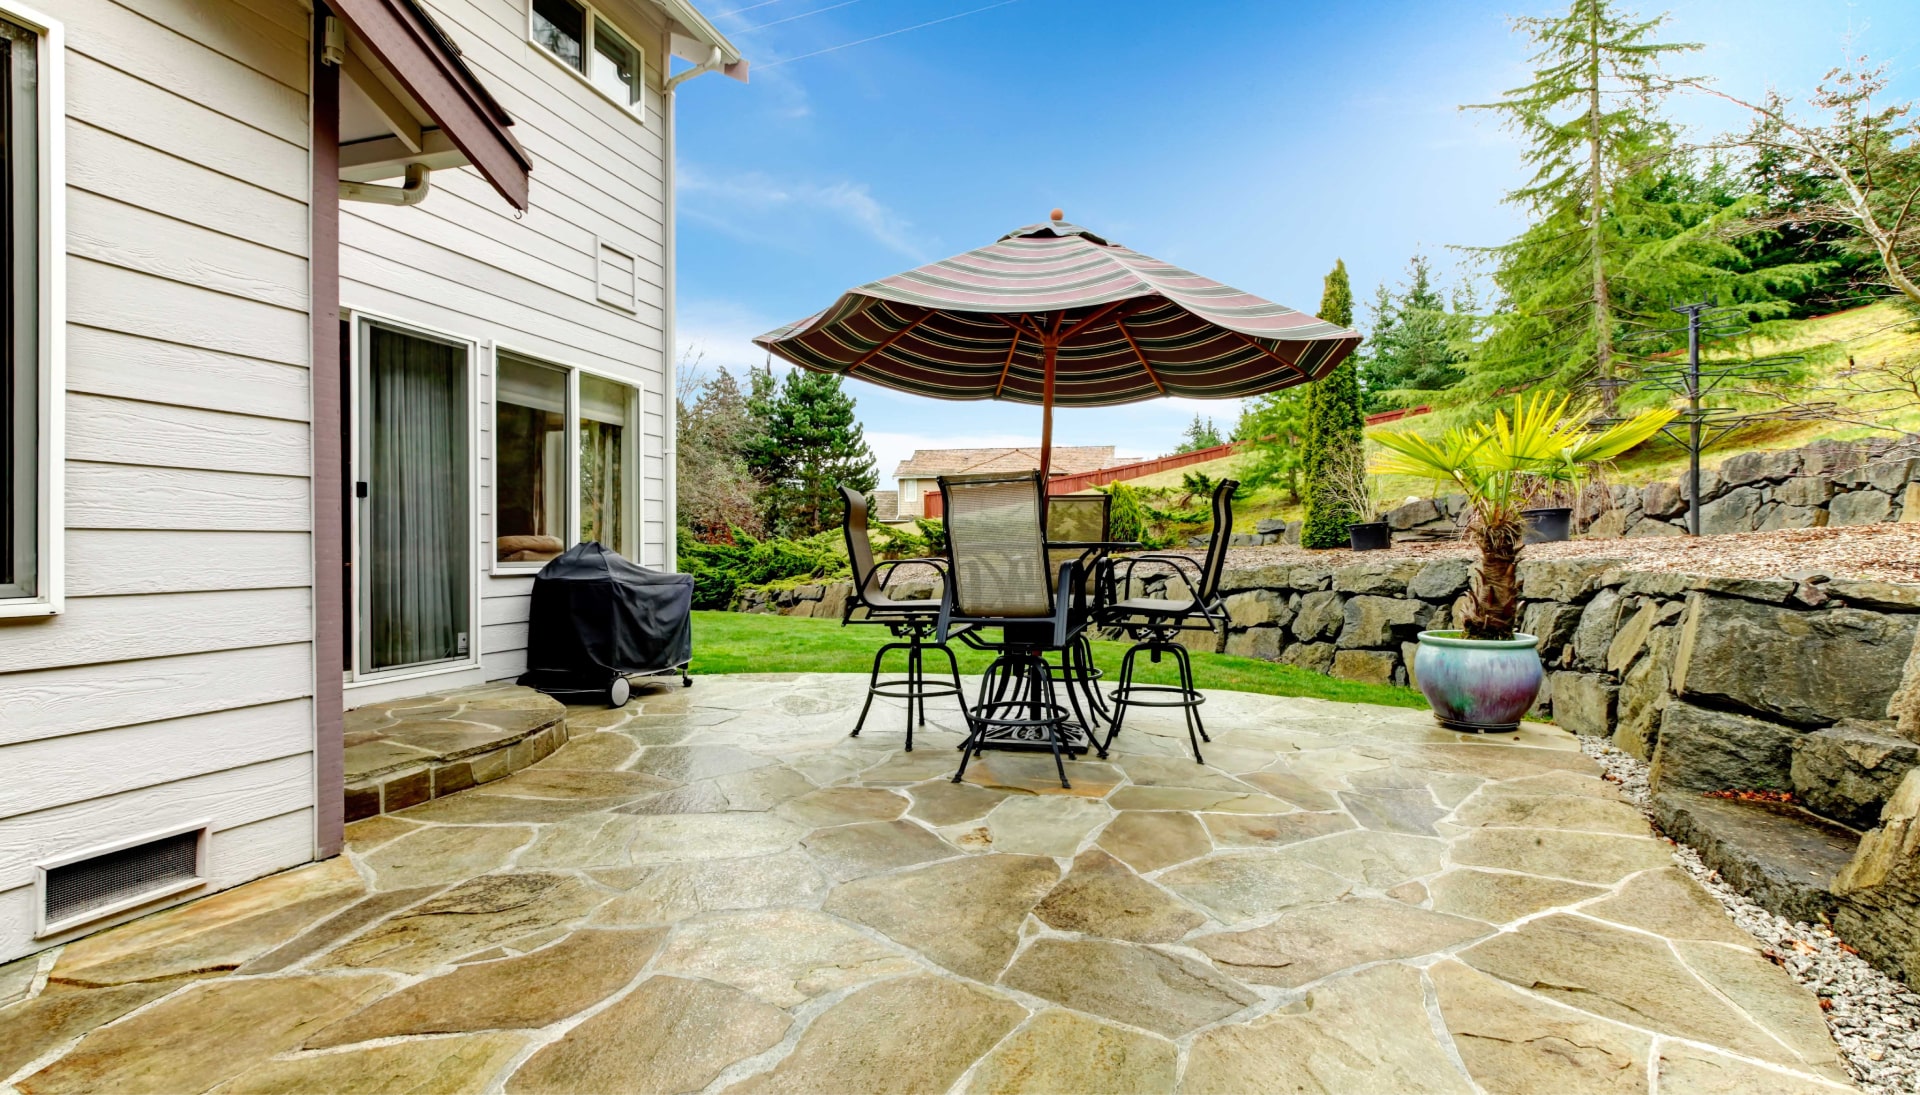 Beautifully Textured and Patterned Concrete Patios in Lansing, Michigan area!